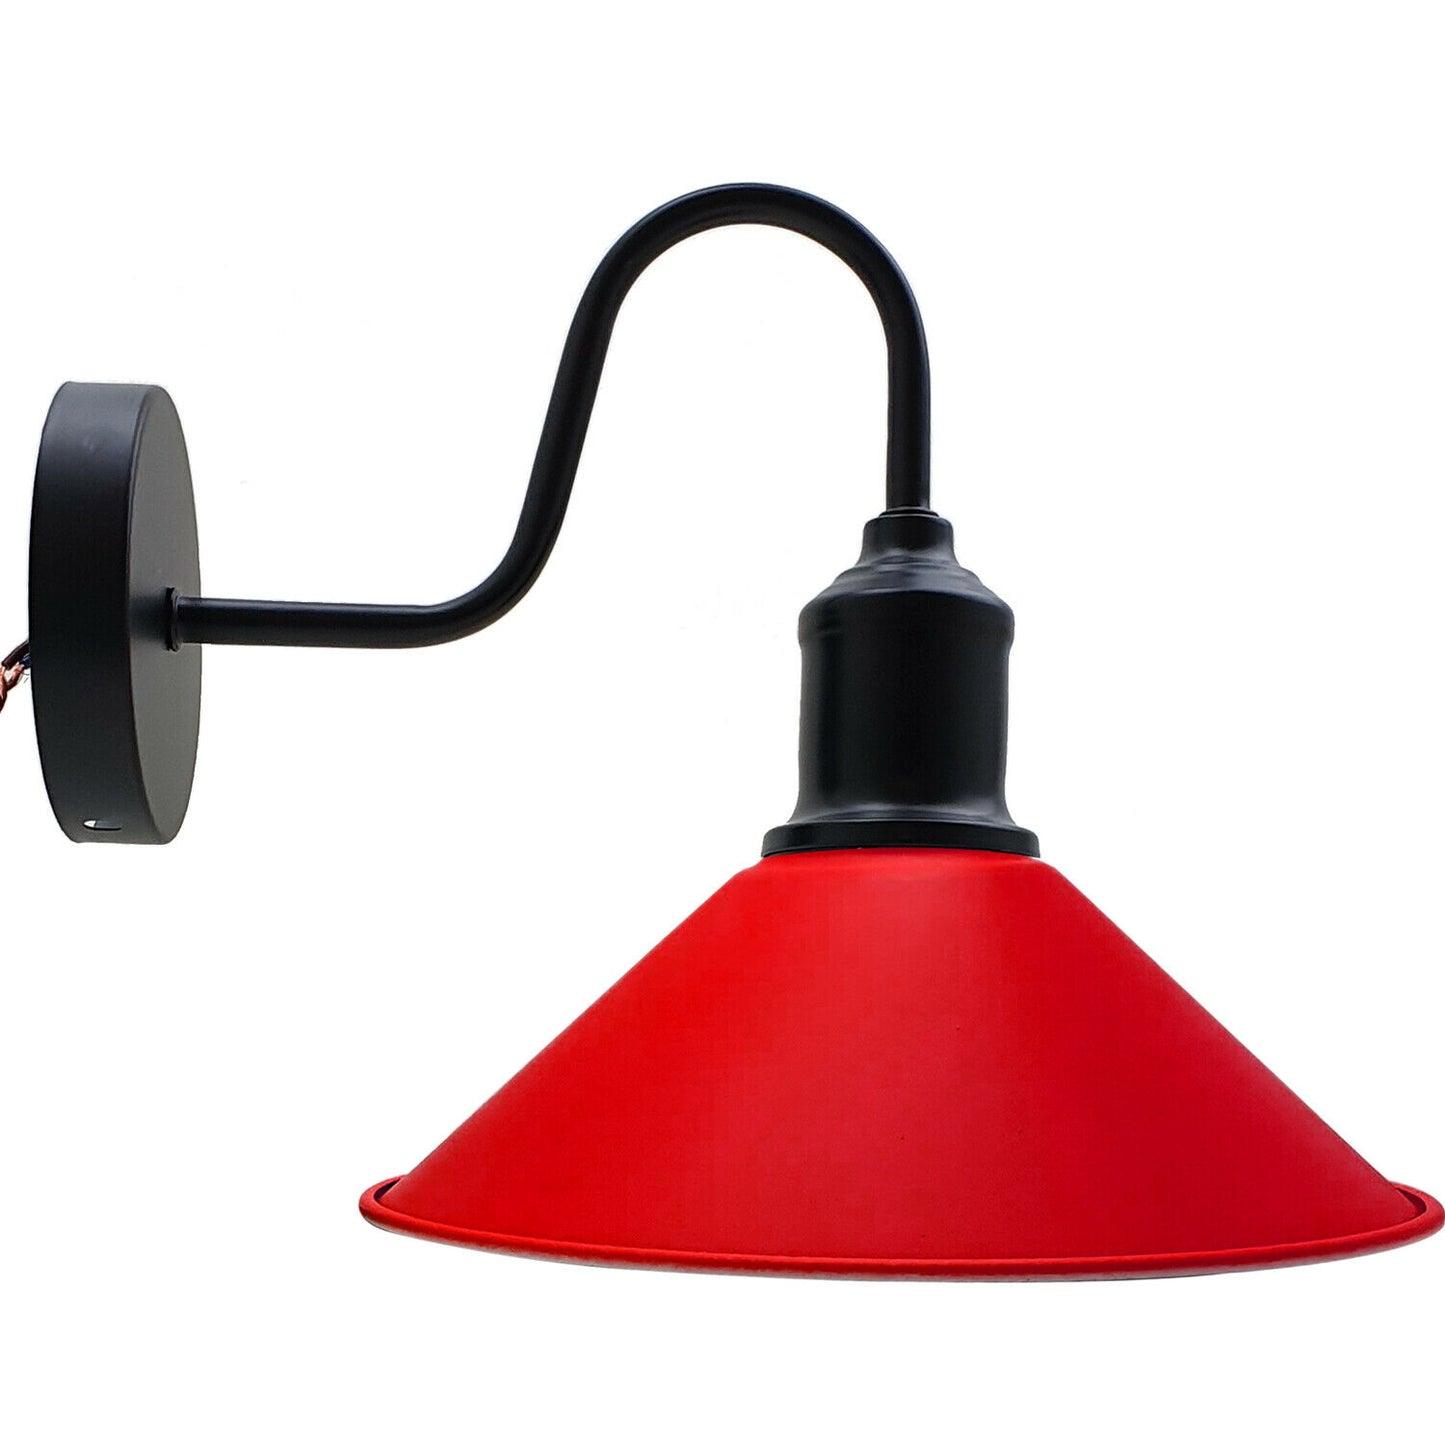 Vintage Retro Industrial Red Cone Light Shades Swan Neck Wall light